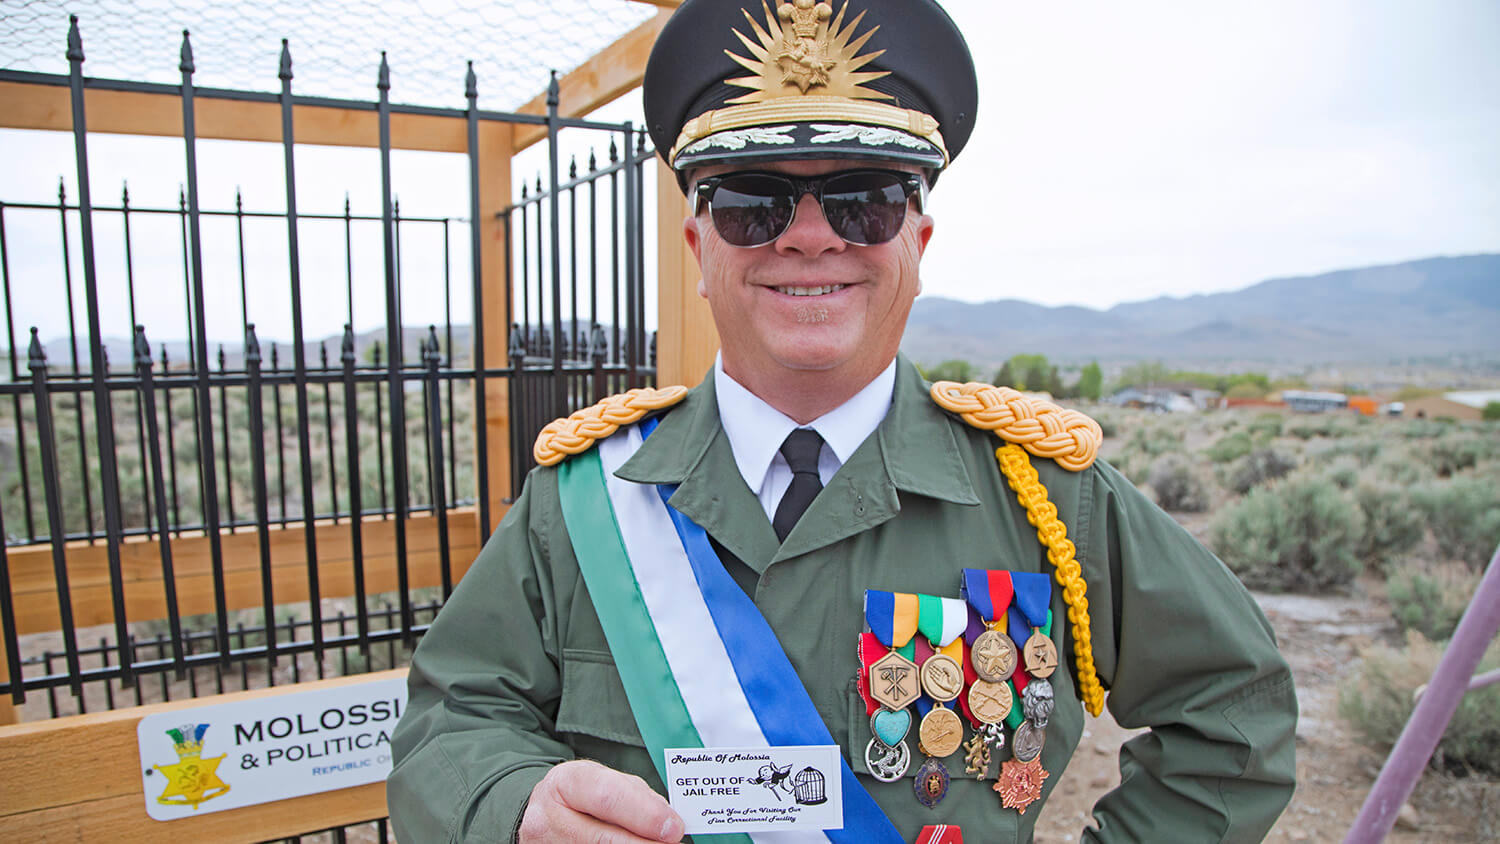 A World of Weird in the Micronation of Molossia